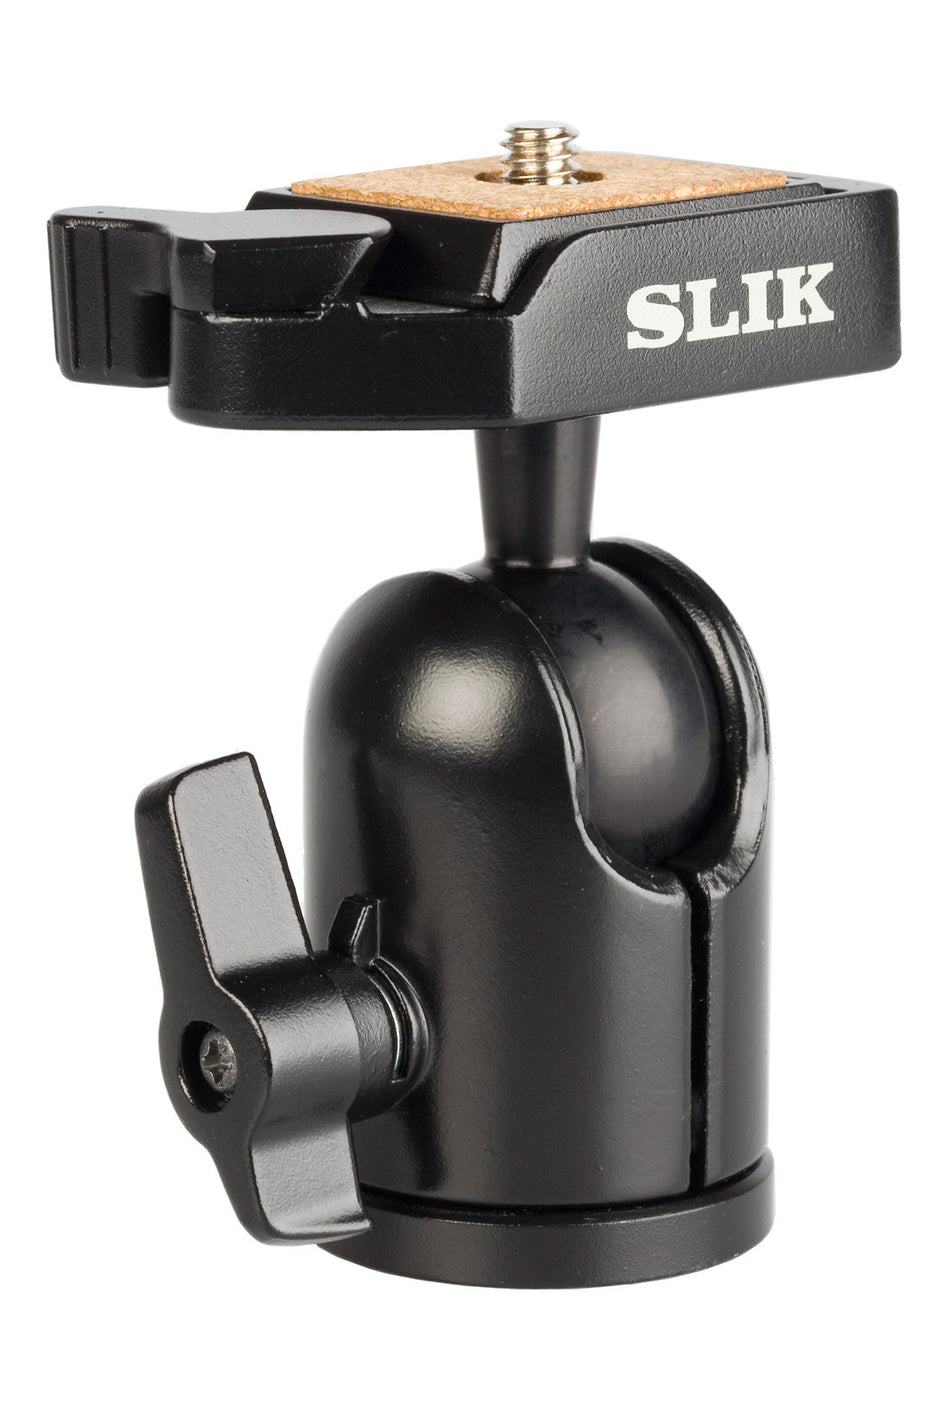 SLIK SBH-120 DQ Compact Ball Head (Large) with Quick Release